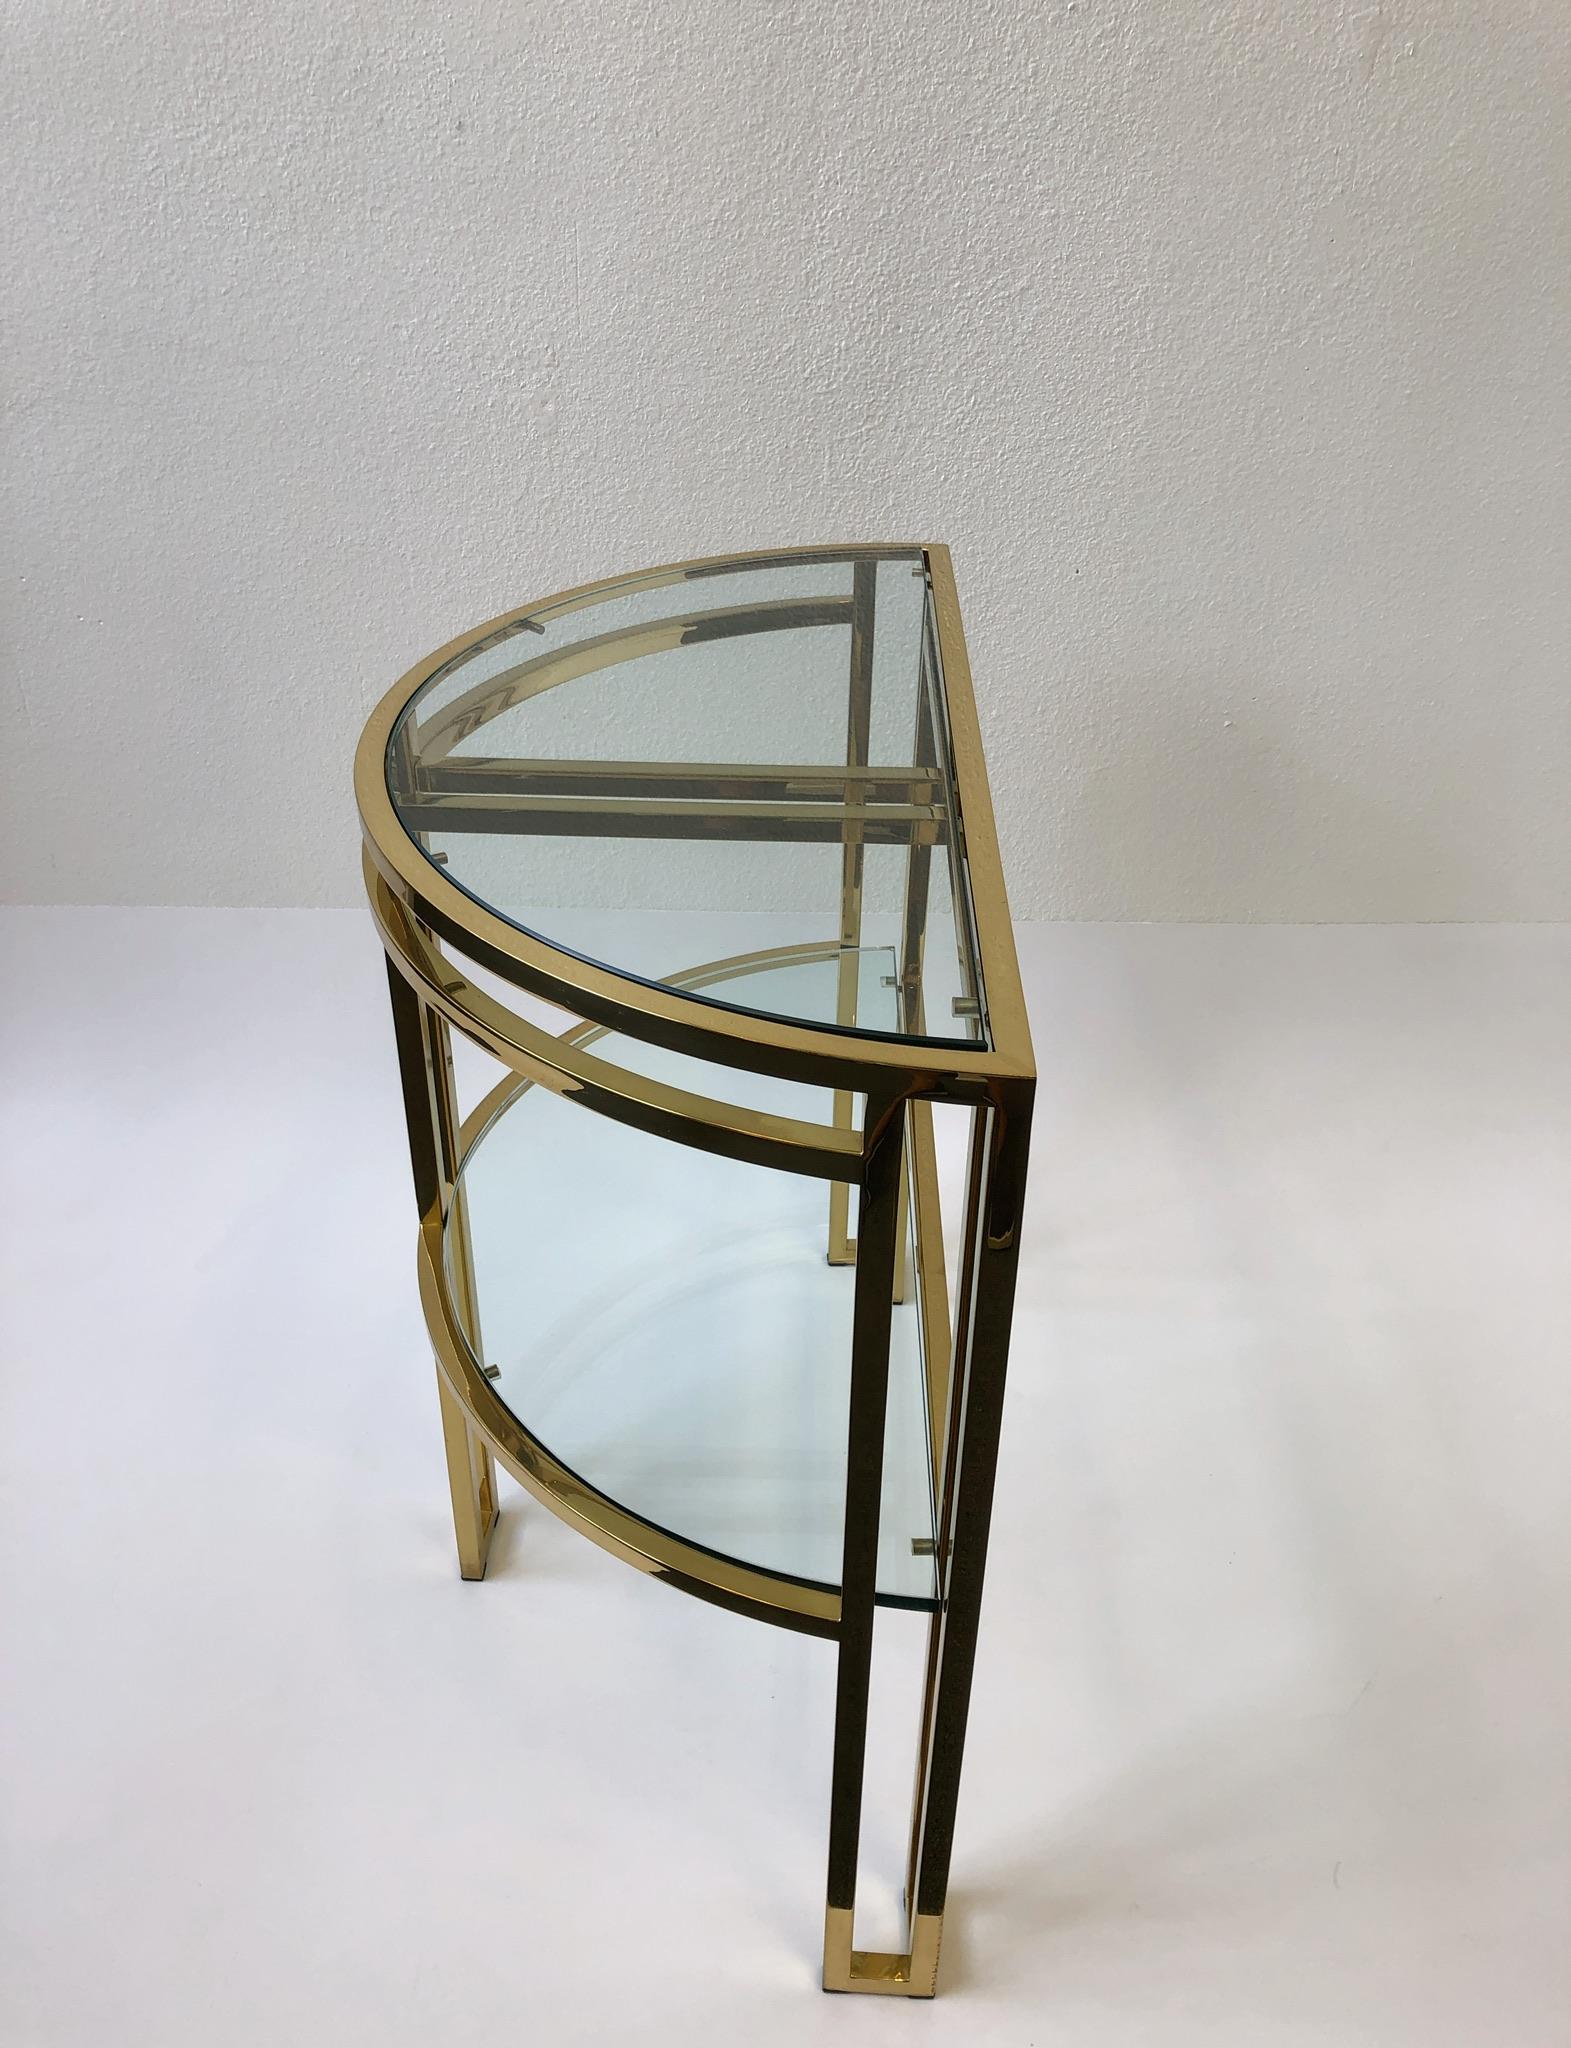 American Polish Brass and Glass Demilune Two-Tier Console Table by Milo Baughman